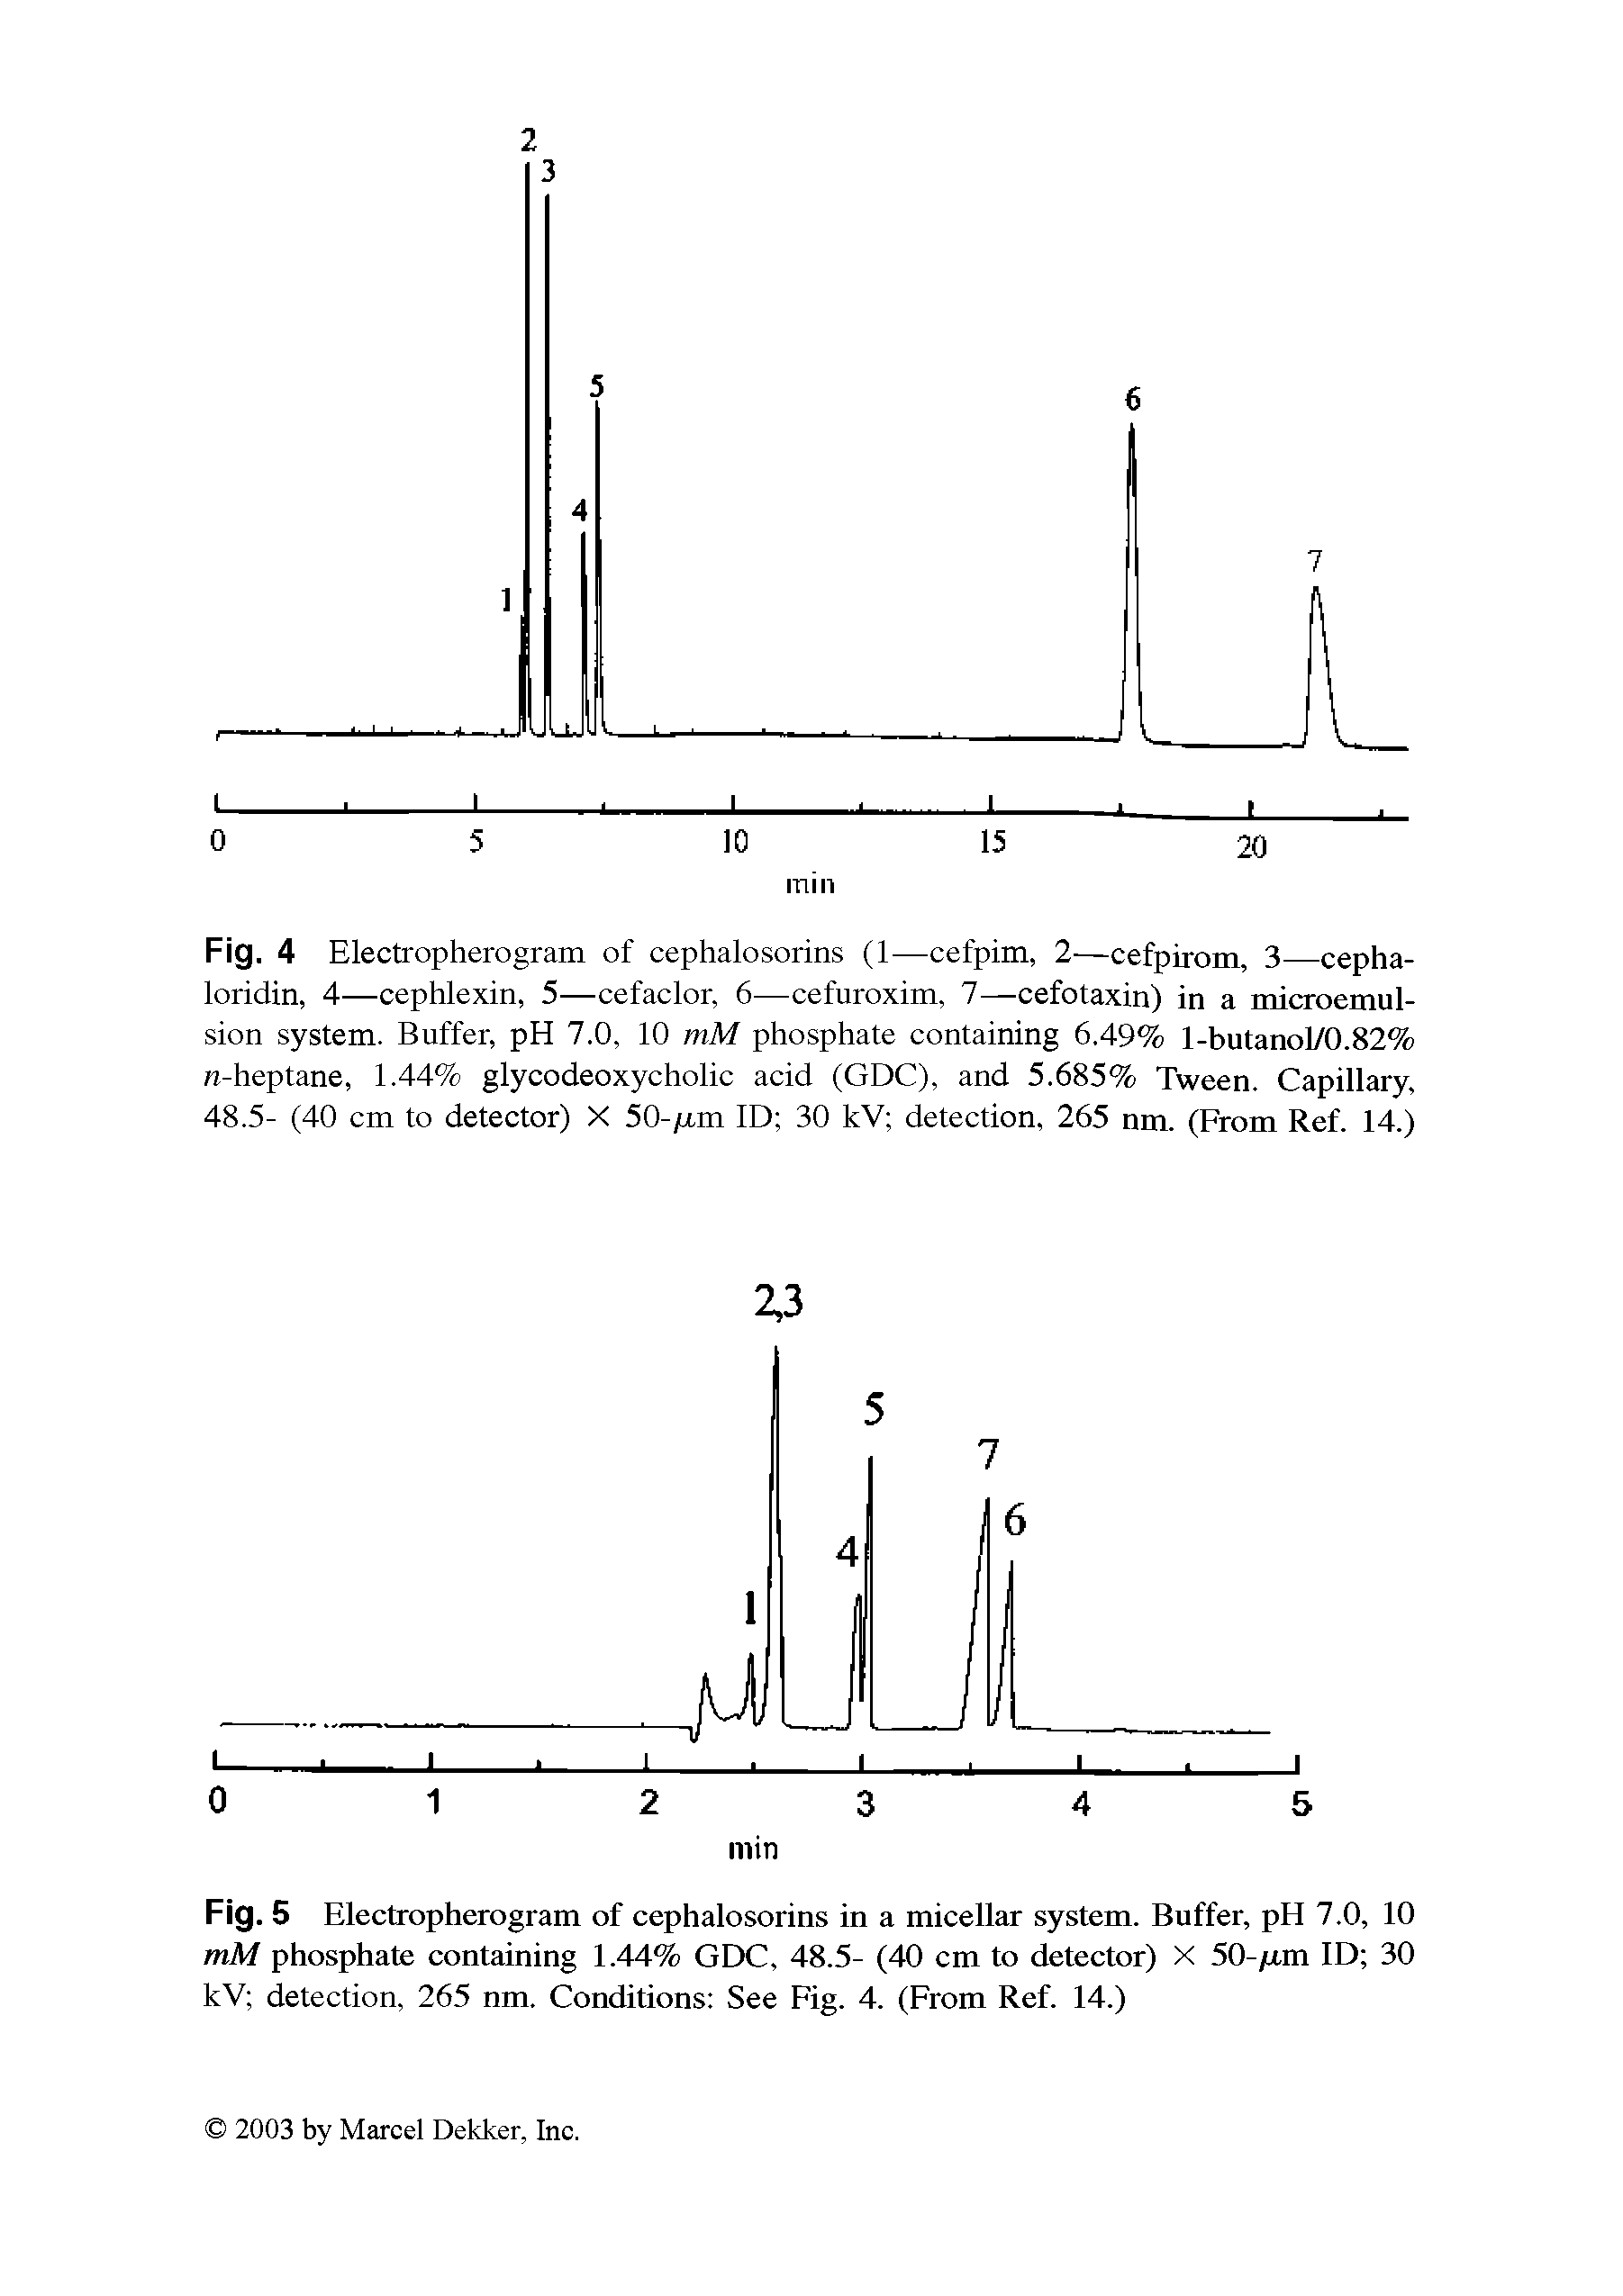 Fig. 4 Electropherogram of cephalosorins (1—cefpim, 2—cefpirom, 3—cepha-loridin, 4—cephlexin, 5—cefaclor, 6—cefuroxim, 7—cefotaxin) in a microemulsion system. Buffer, pH 7.0, 10 mM phosphate containing 6.49% l-butanol/0.82% ra-heptane, 1.44% glycodeoxycholic acid (GDC), and 5.685% Tween. Capillary, 48.5- (40 cm to detector) X 50-/rm ID 30 kV detection, 265 nm. (From Ref. 14.)...